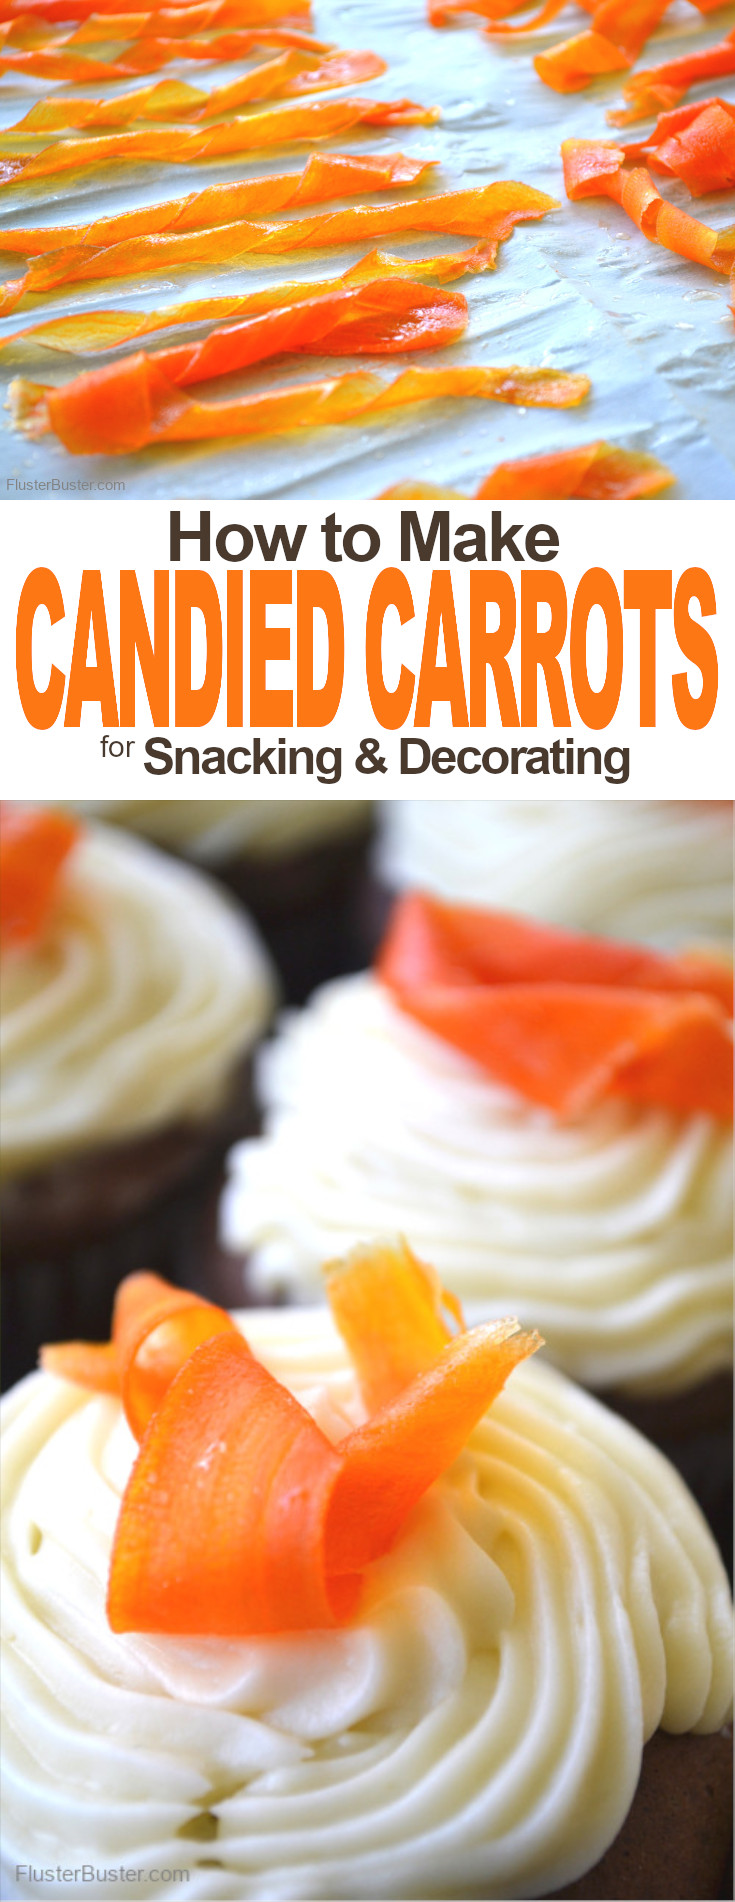 Candied Carrots for Decorating & Snacking | Fluster Buster